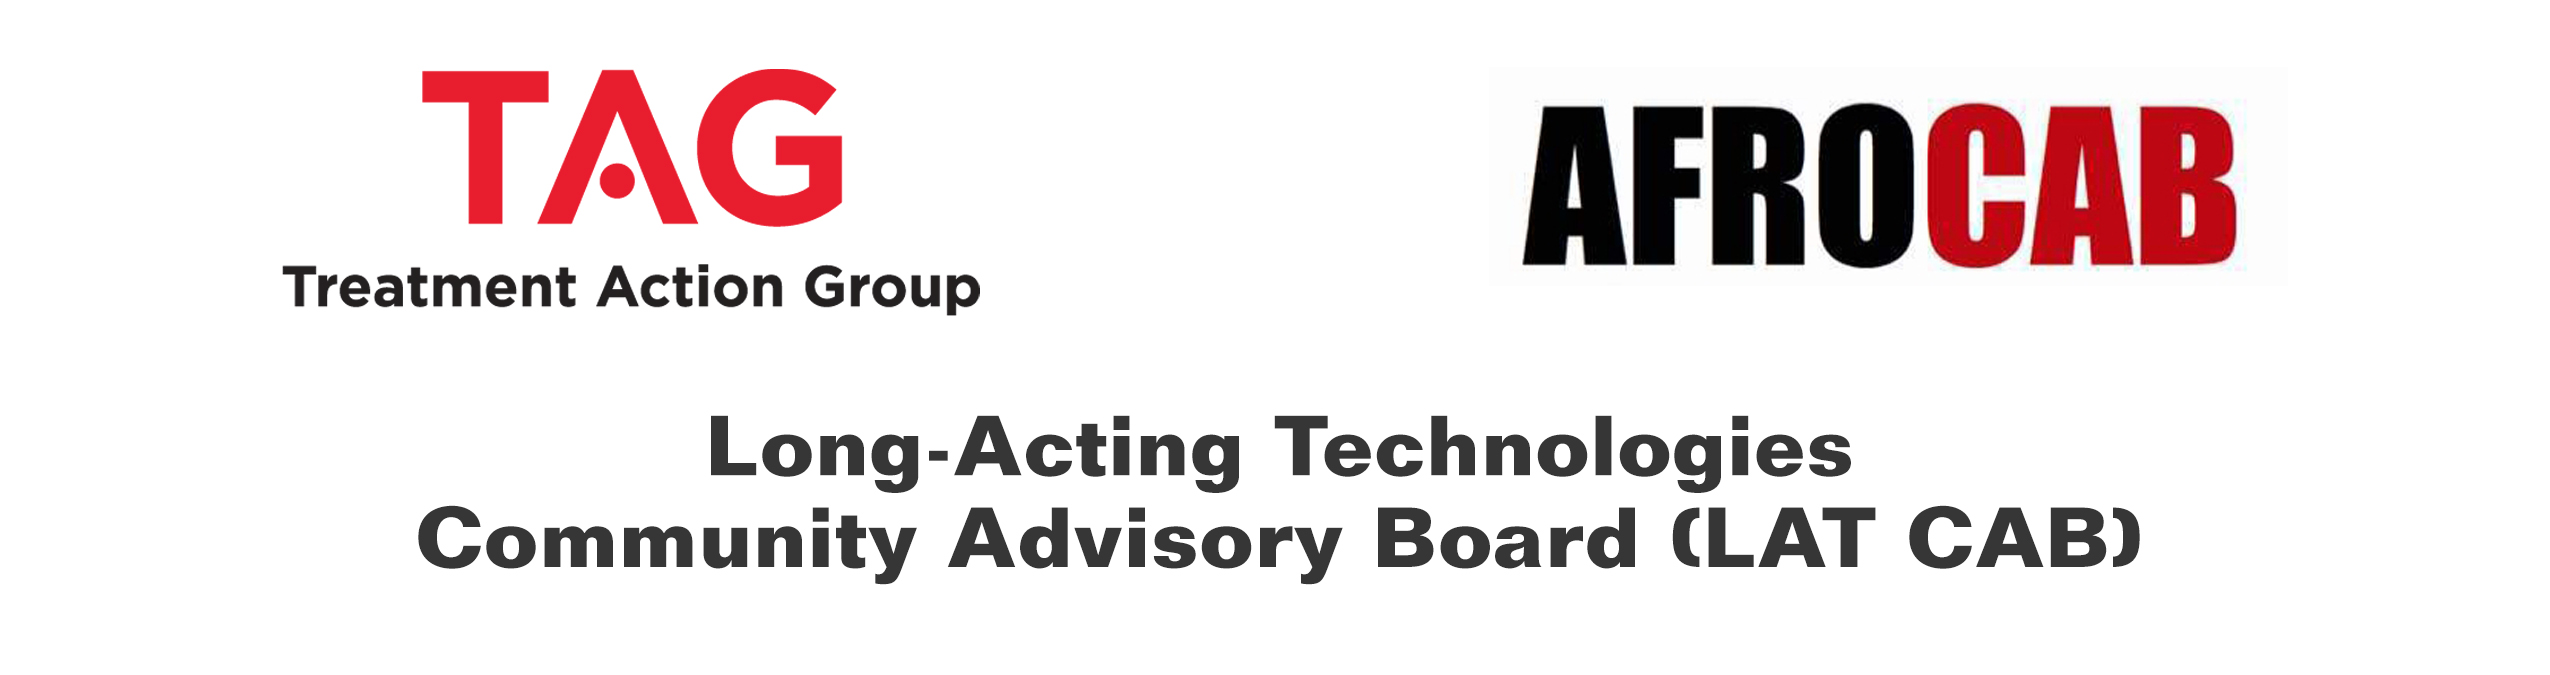 logo montage showing: TAG - Treatment Action Group. Afrocab, and Long Acting Technologies Community Advisory Board (LAT CAB)